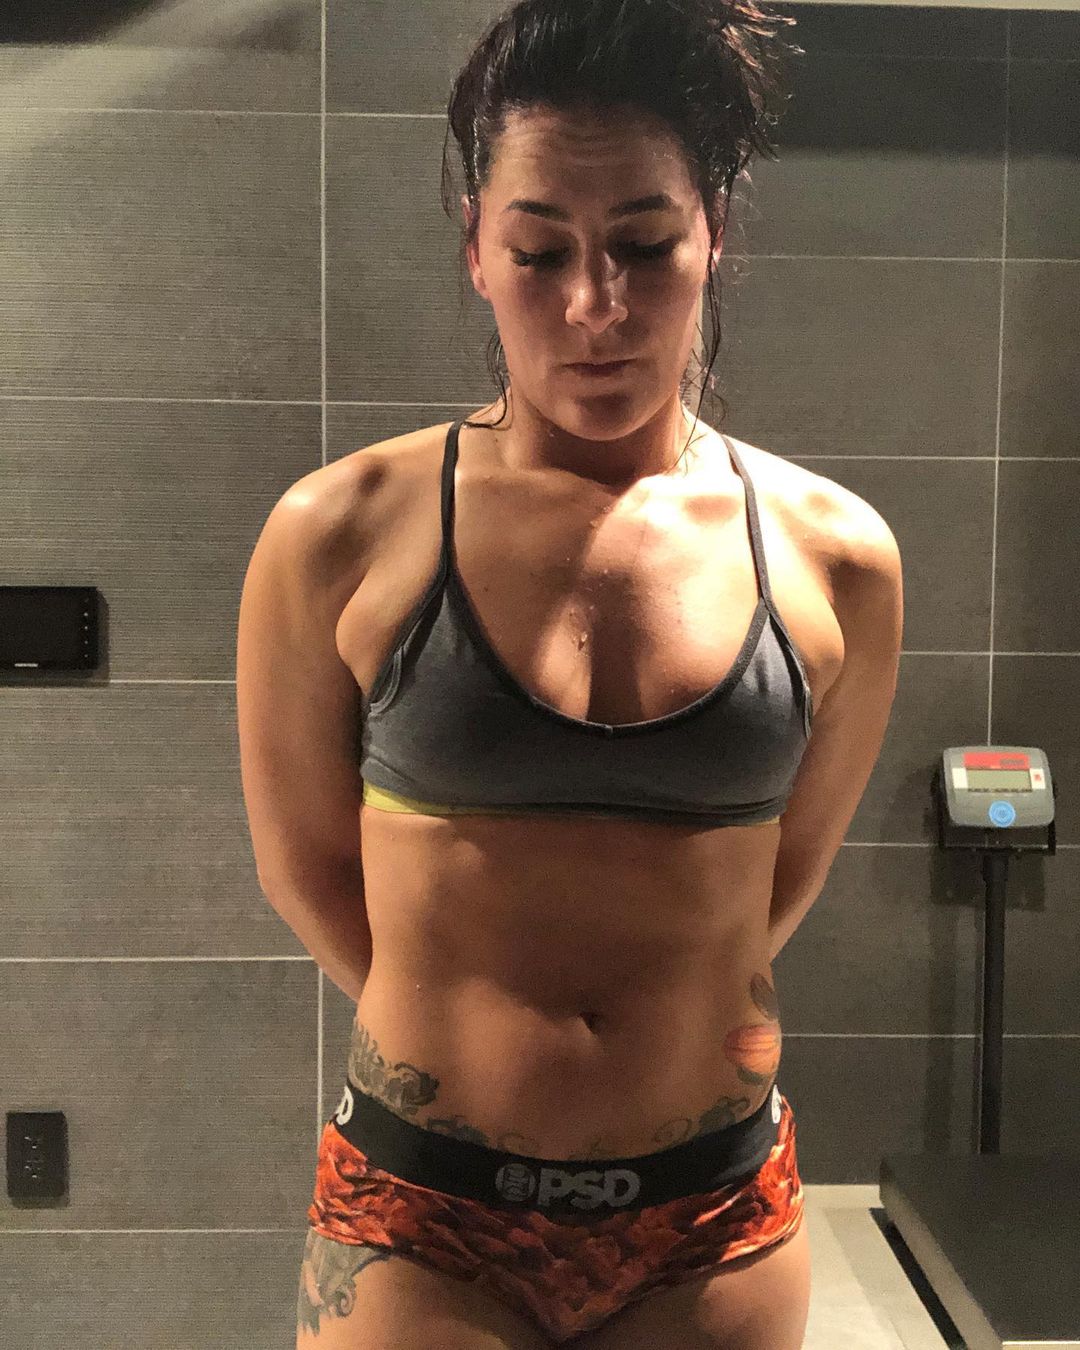 UFC Flyweight Jessica Eye Announces That She Has Joined OnlyFans.